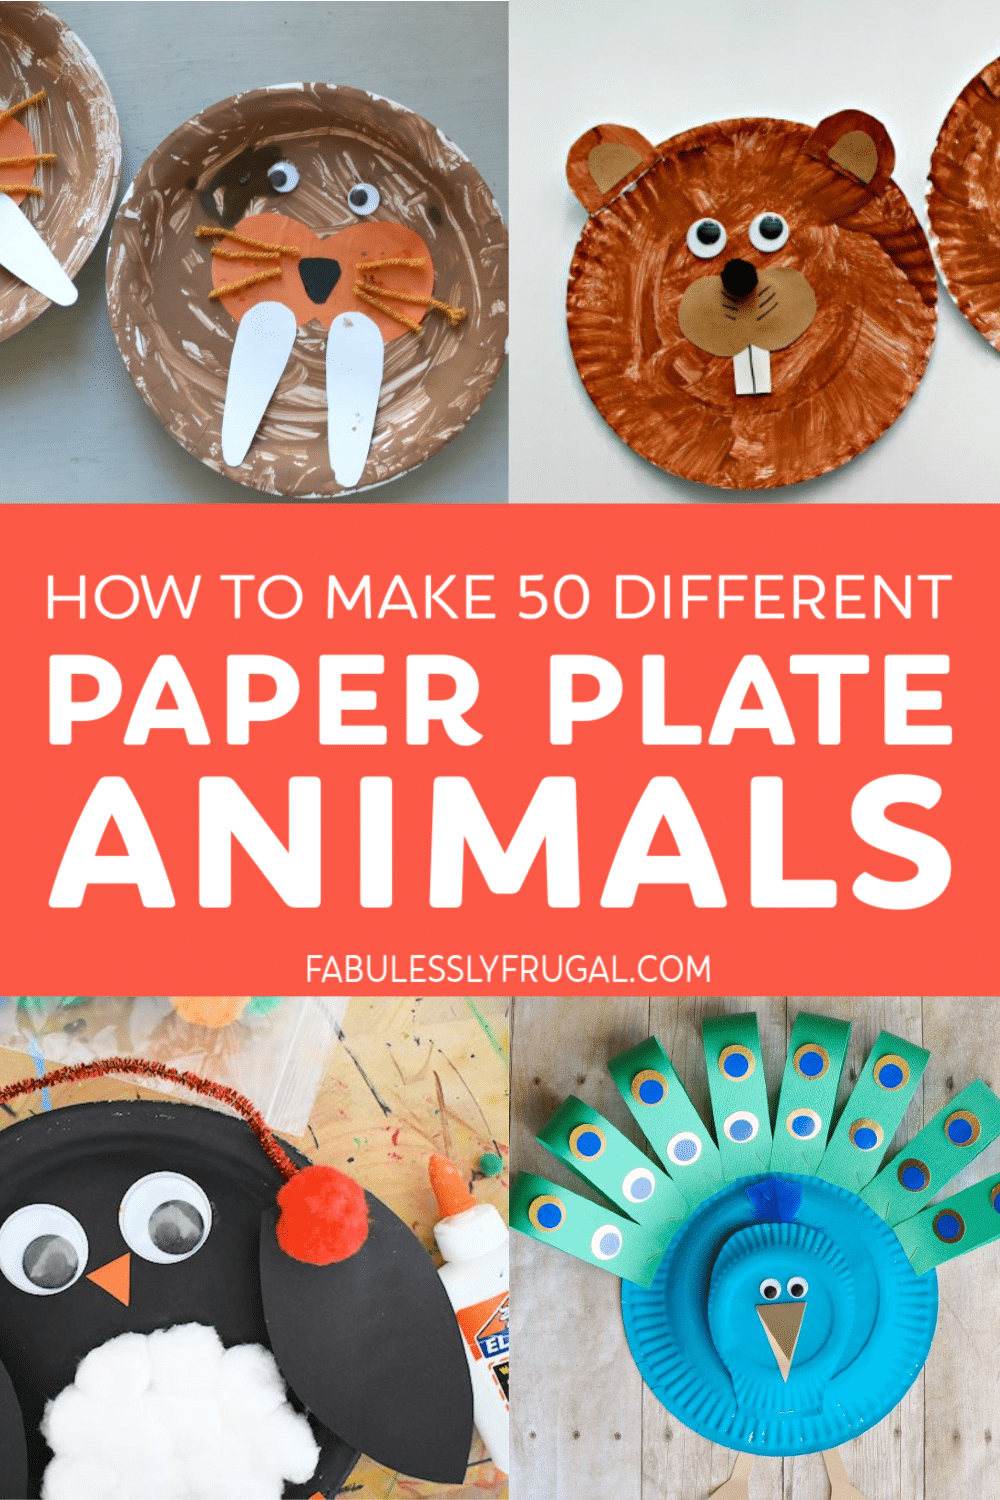 Paper plate animals